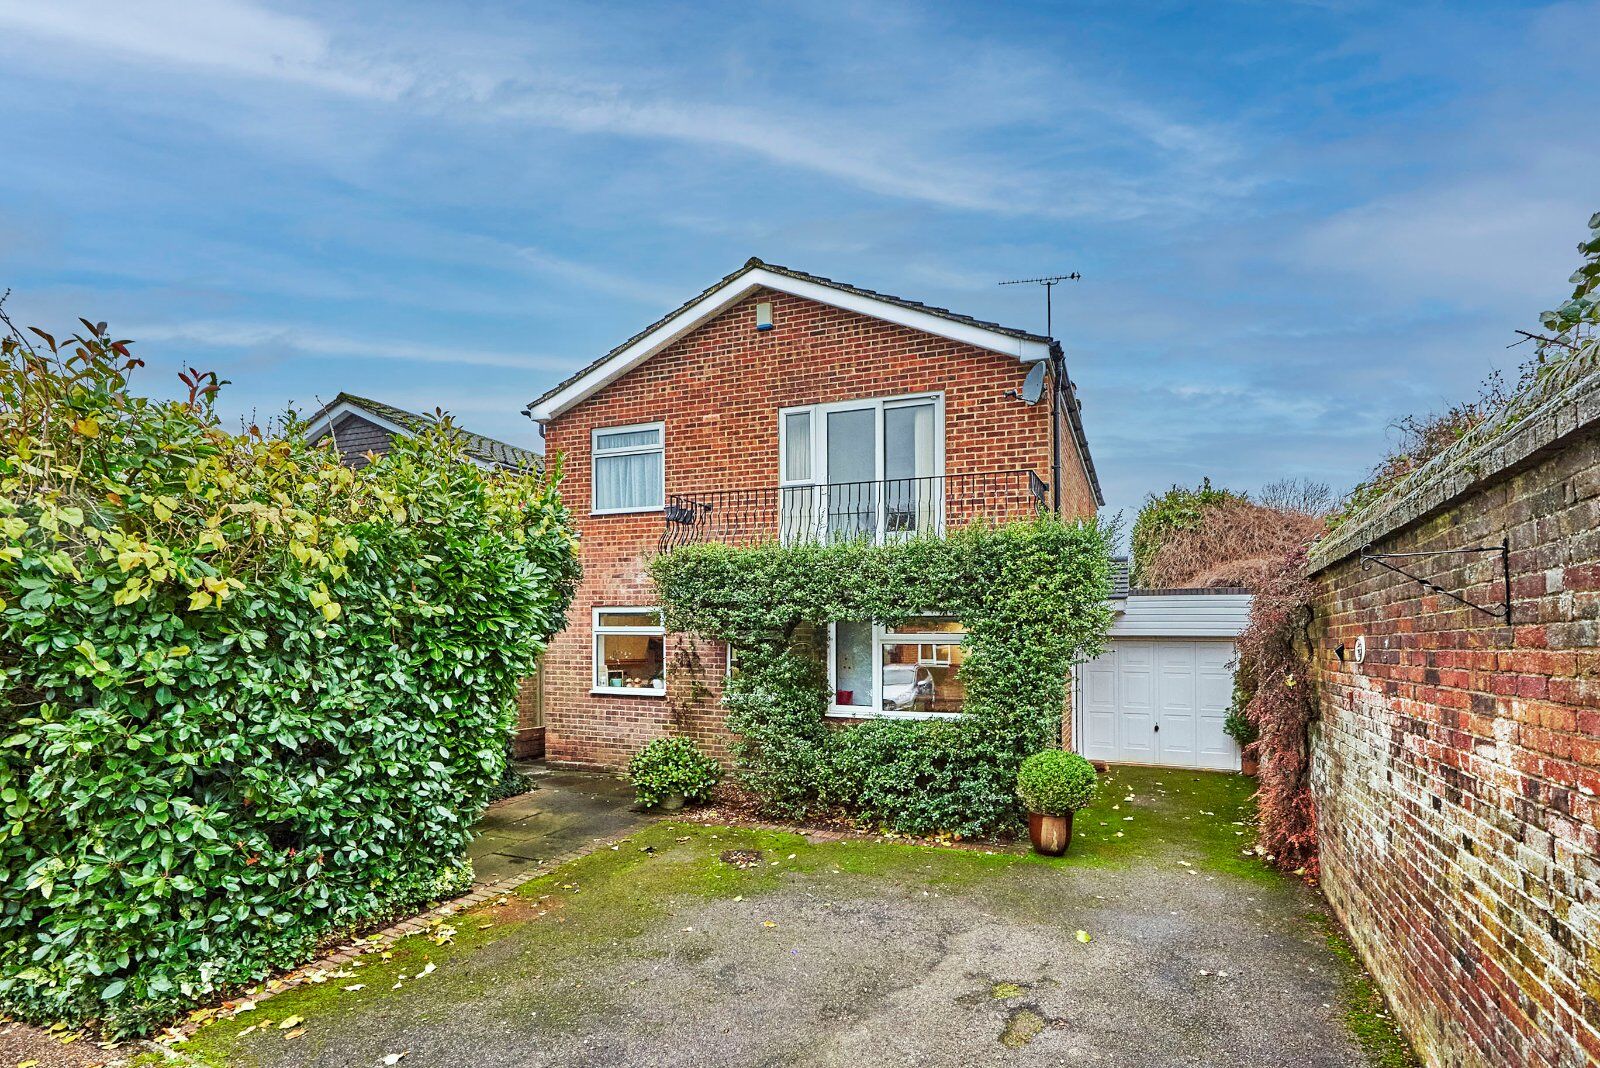 3 bedroom detached house for sale Garden Court, Wheathampstead, AL4, main image